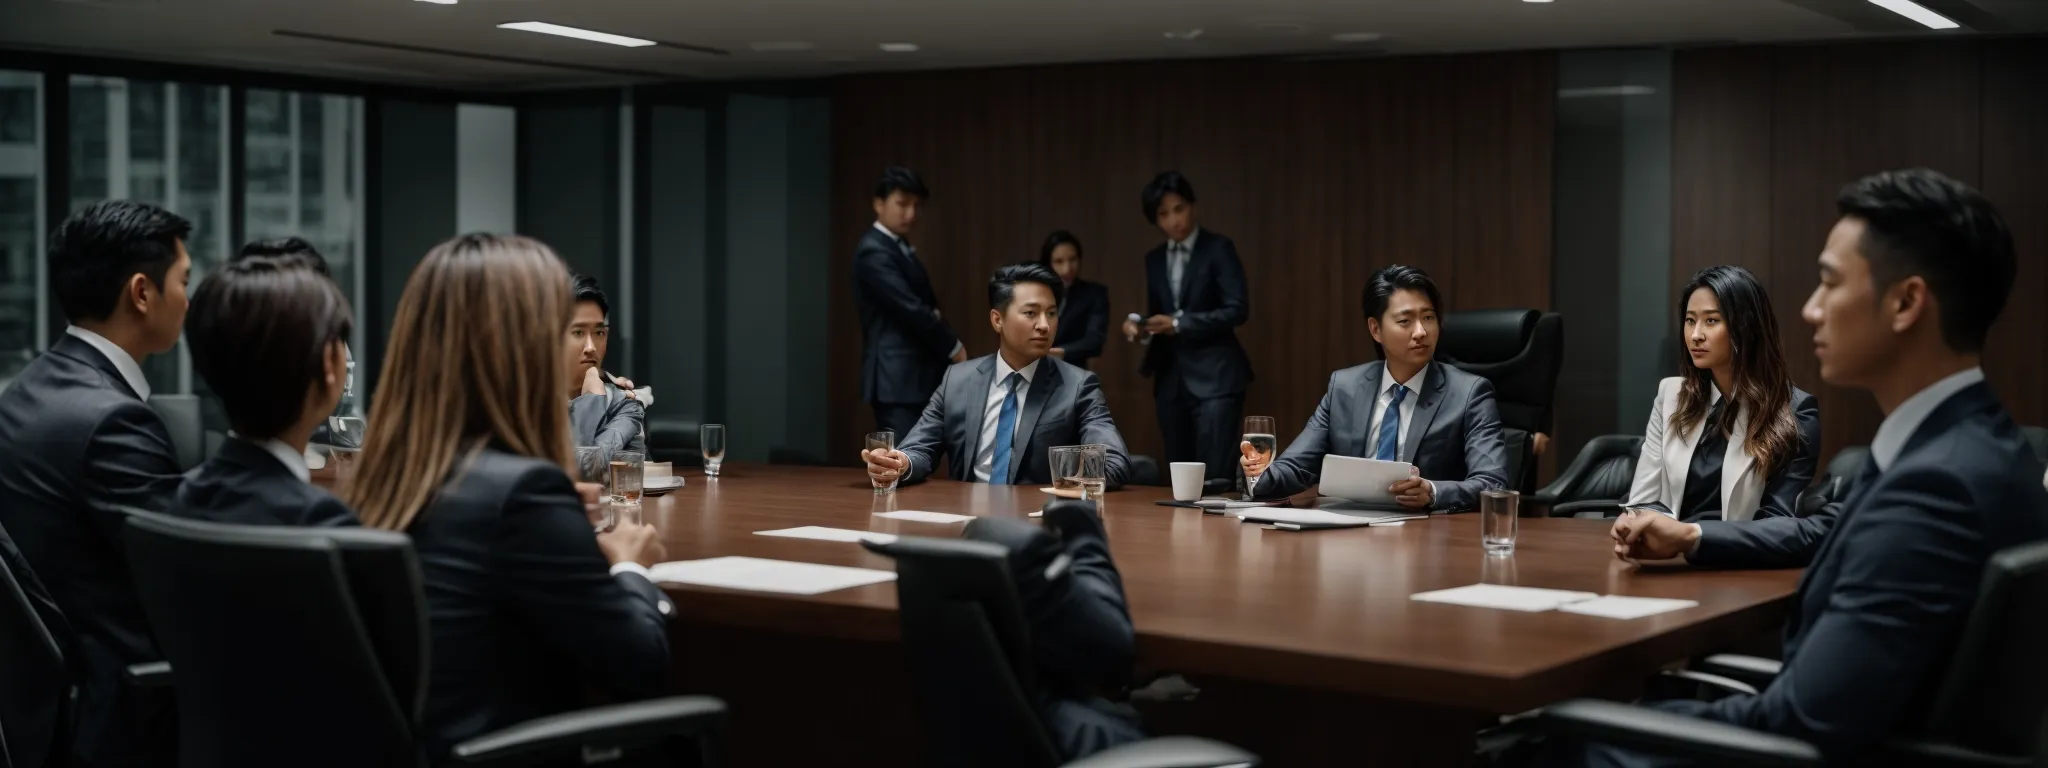 a business meeting with an seo consultant and company executives taking place in a modern conference room.